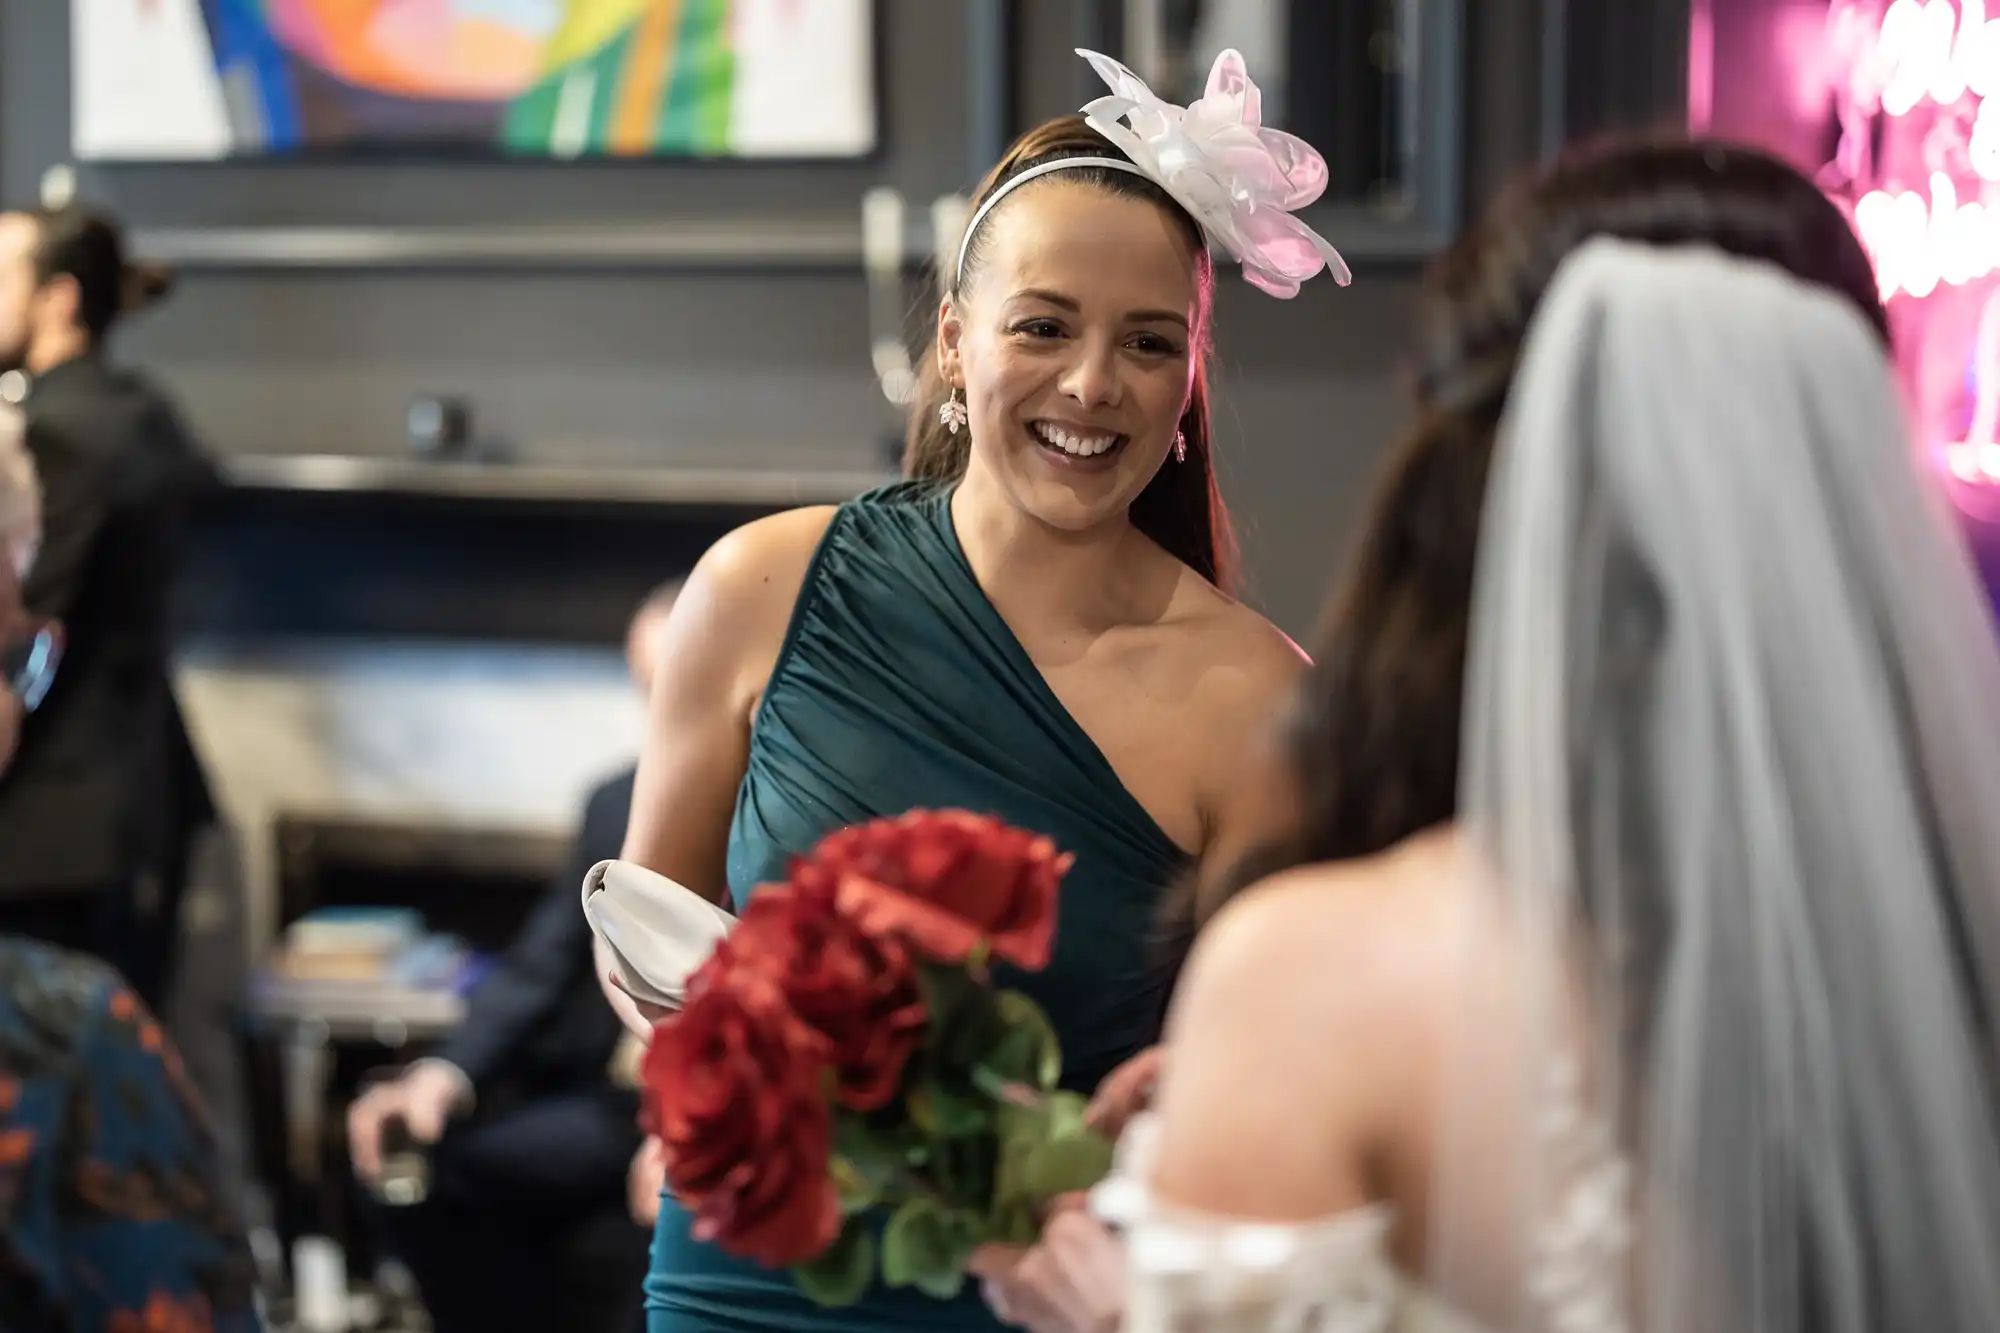 A woman in a green one-shoulder dress and white fascinator smiles while holding a bouquet of red flowers, speaking to a bride with a white veil in an indoor setting.